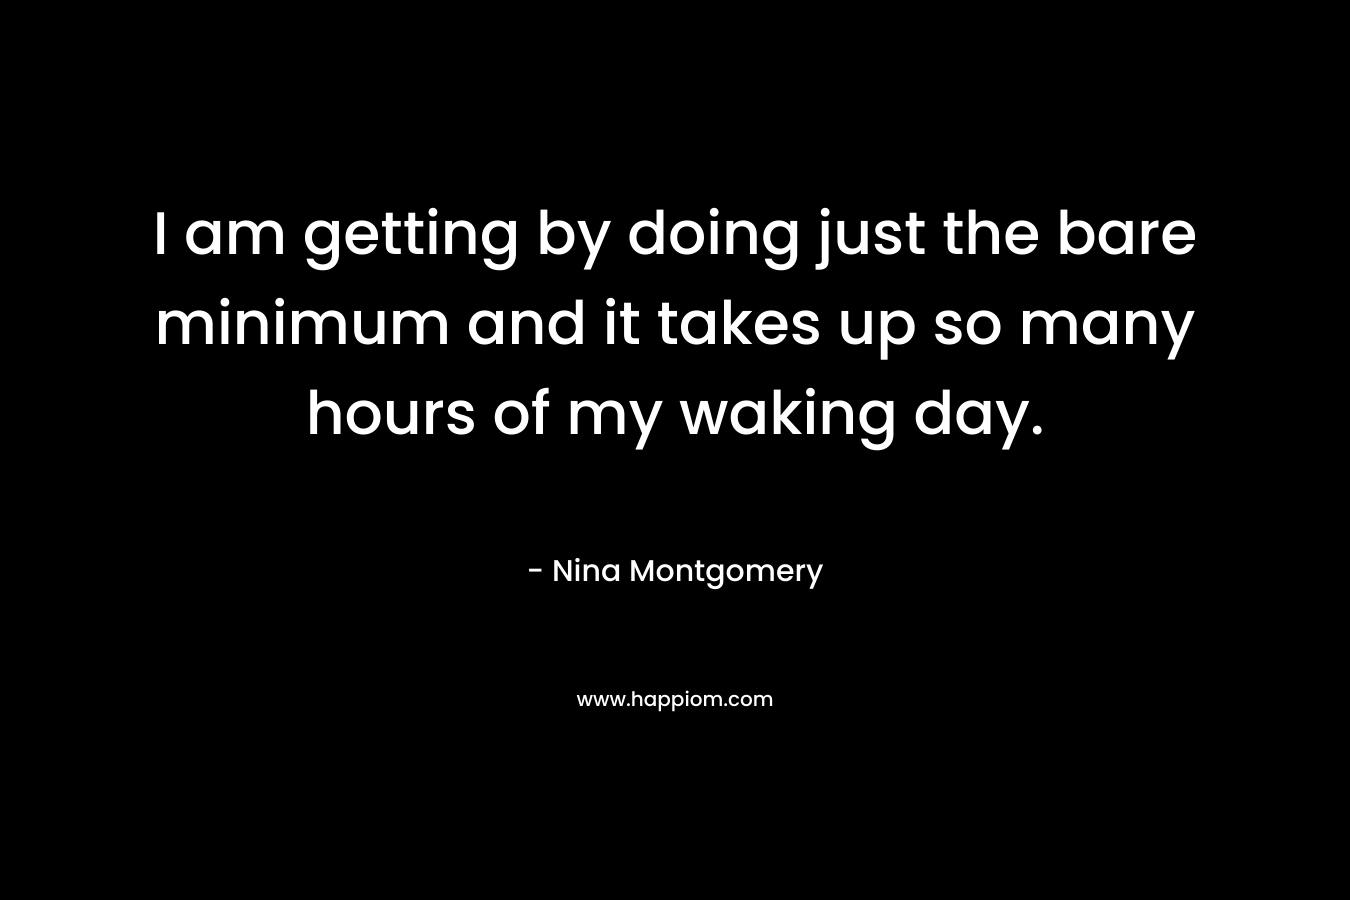 I am getting by doing just the bare minimum and it takes up so many hours of my waking day.